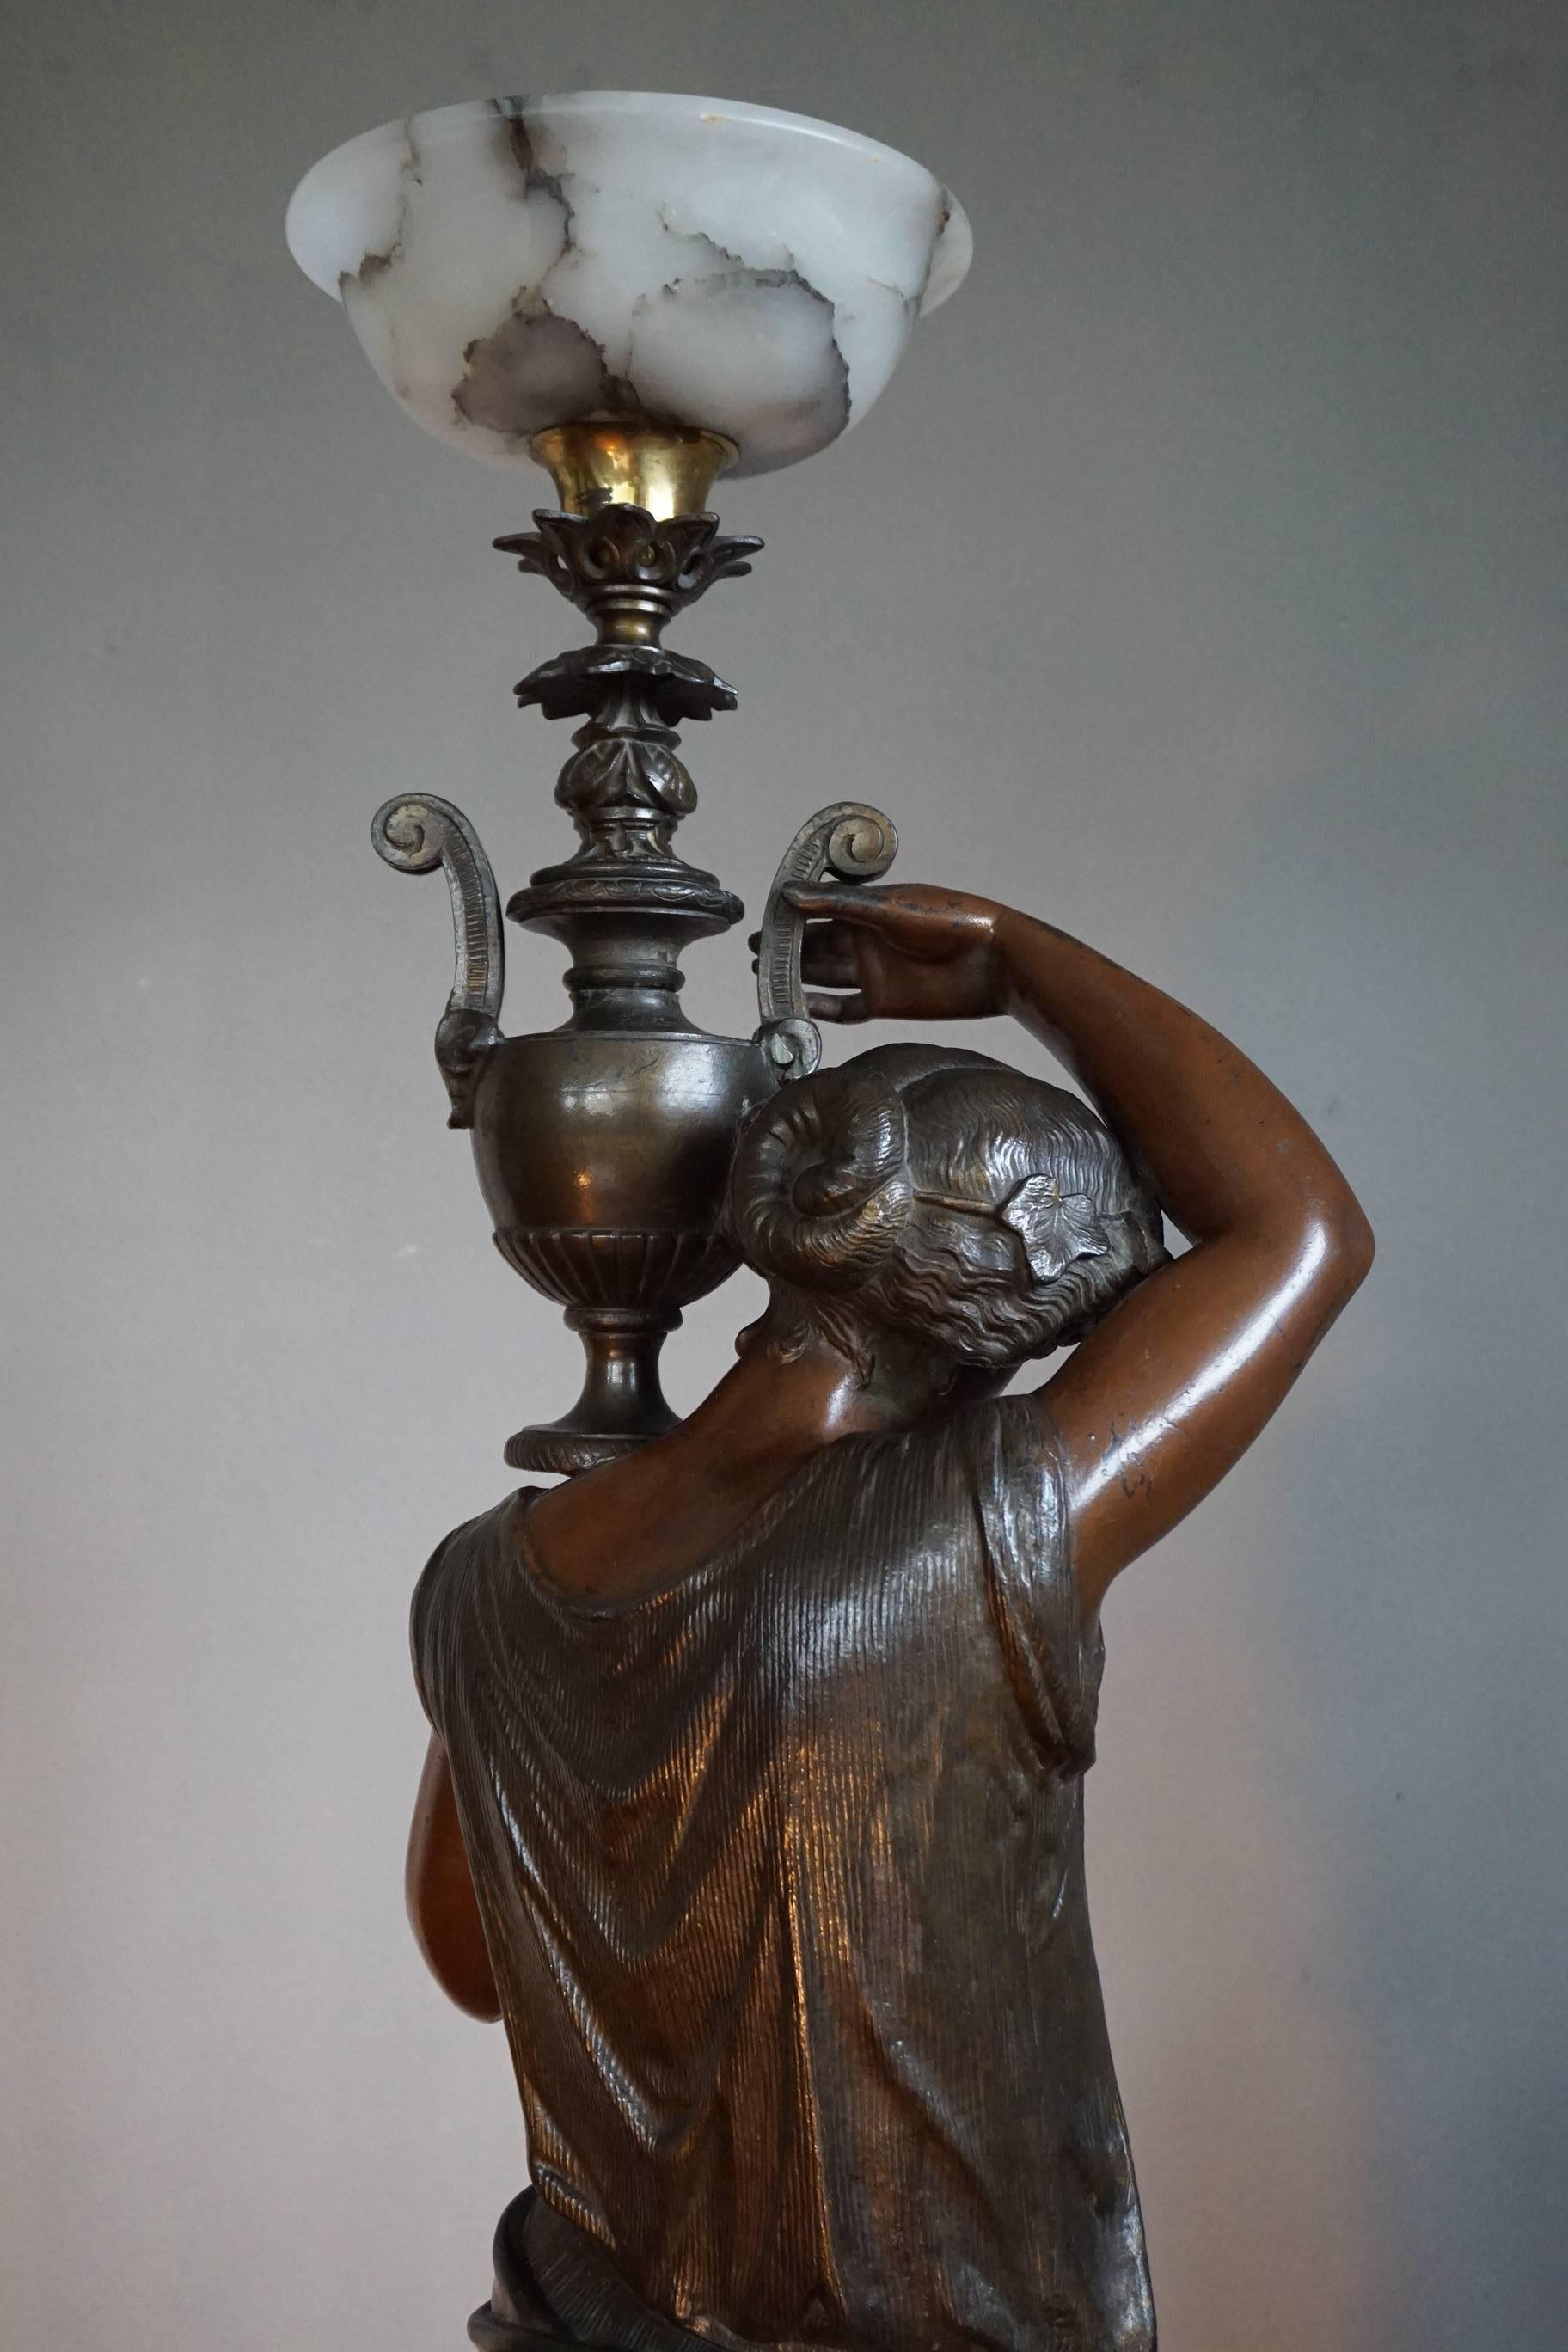 19th Century Art Nouveau Era, Bronzed and Marked 4 Feet Floor Lamp of Dione Goddess of Water